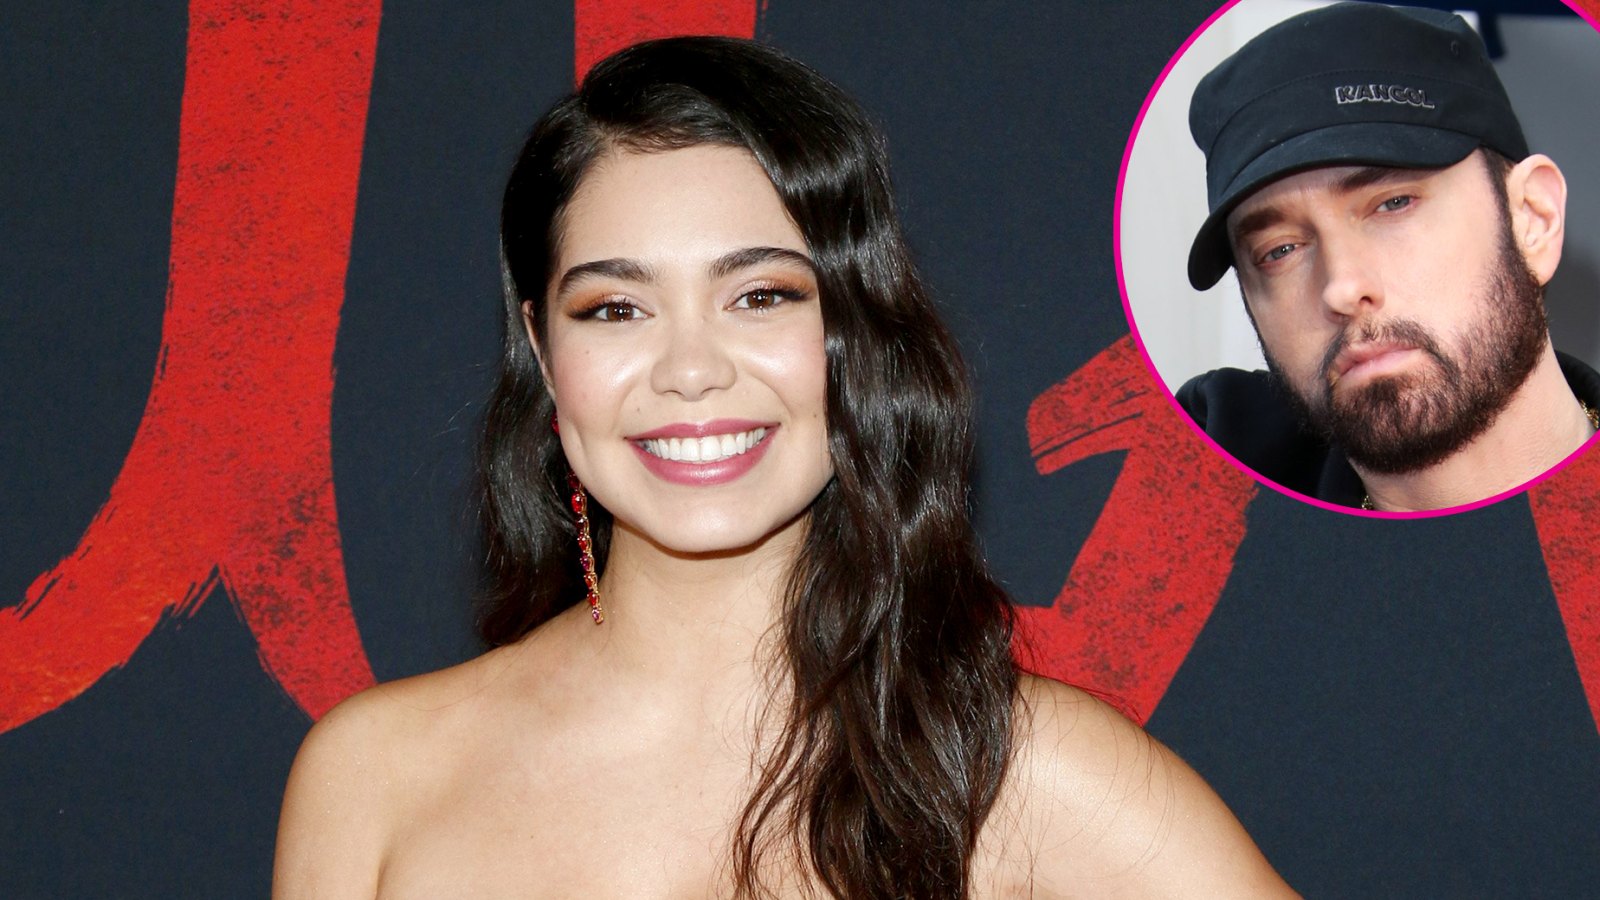 Moana Auli’i Cravalho Comes Out as Bisexual With Eminems Help on TikTok